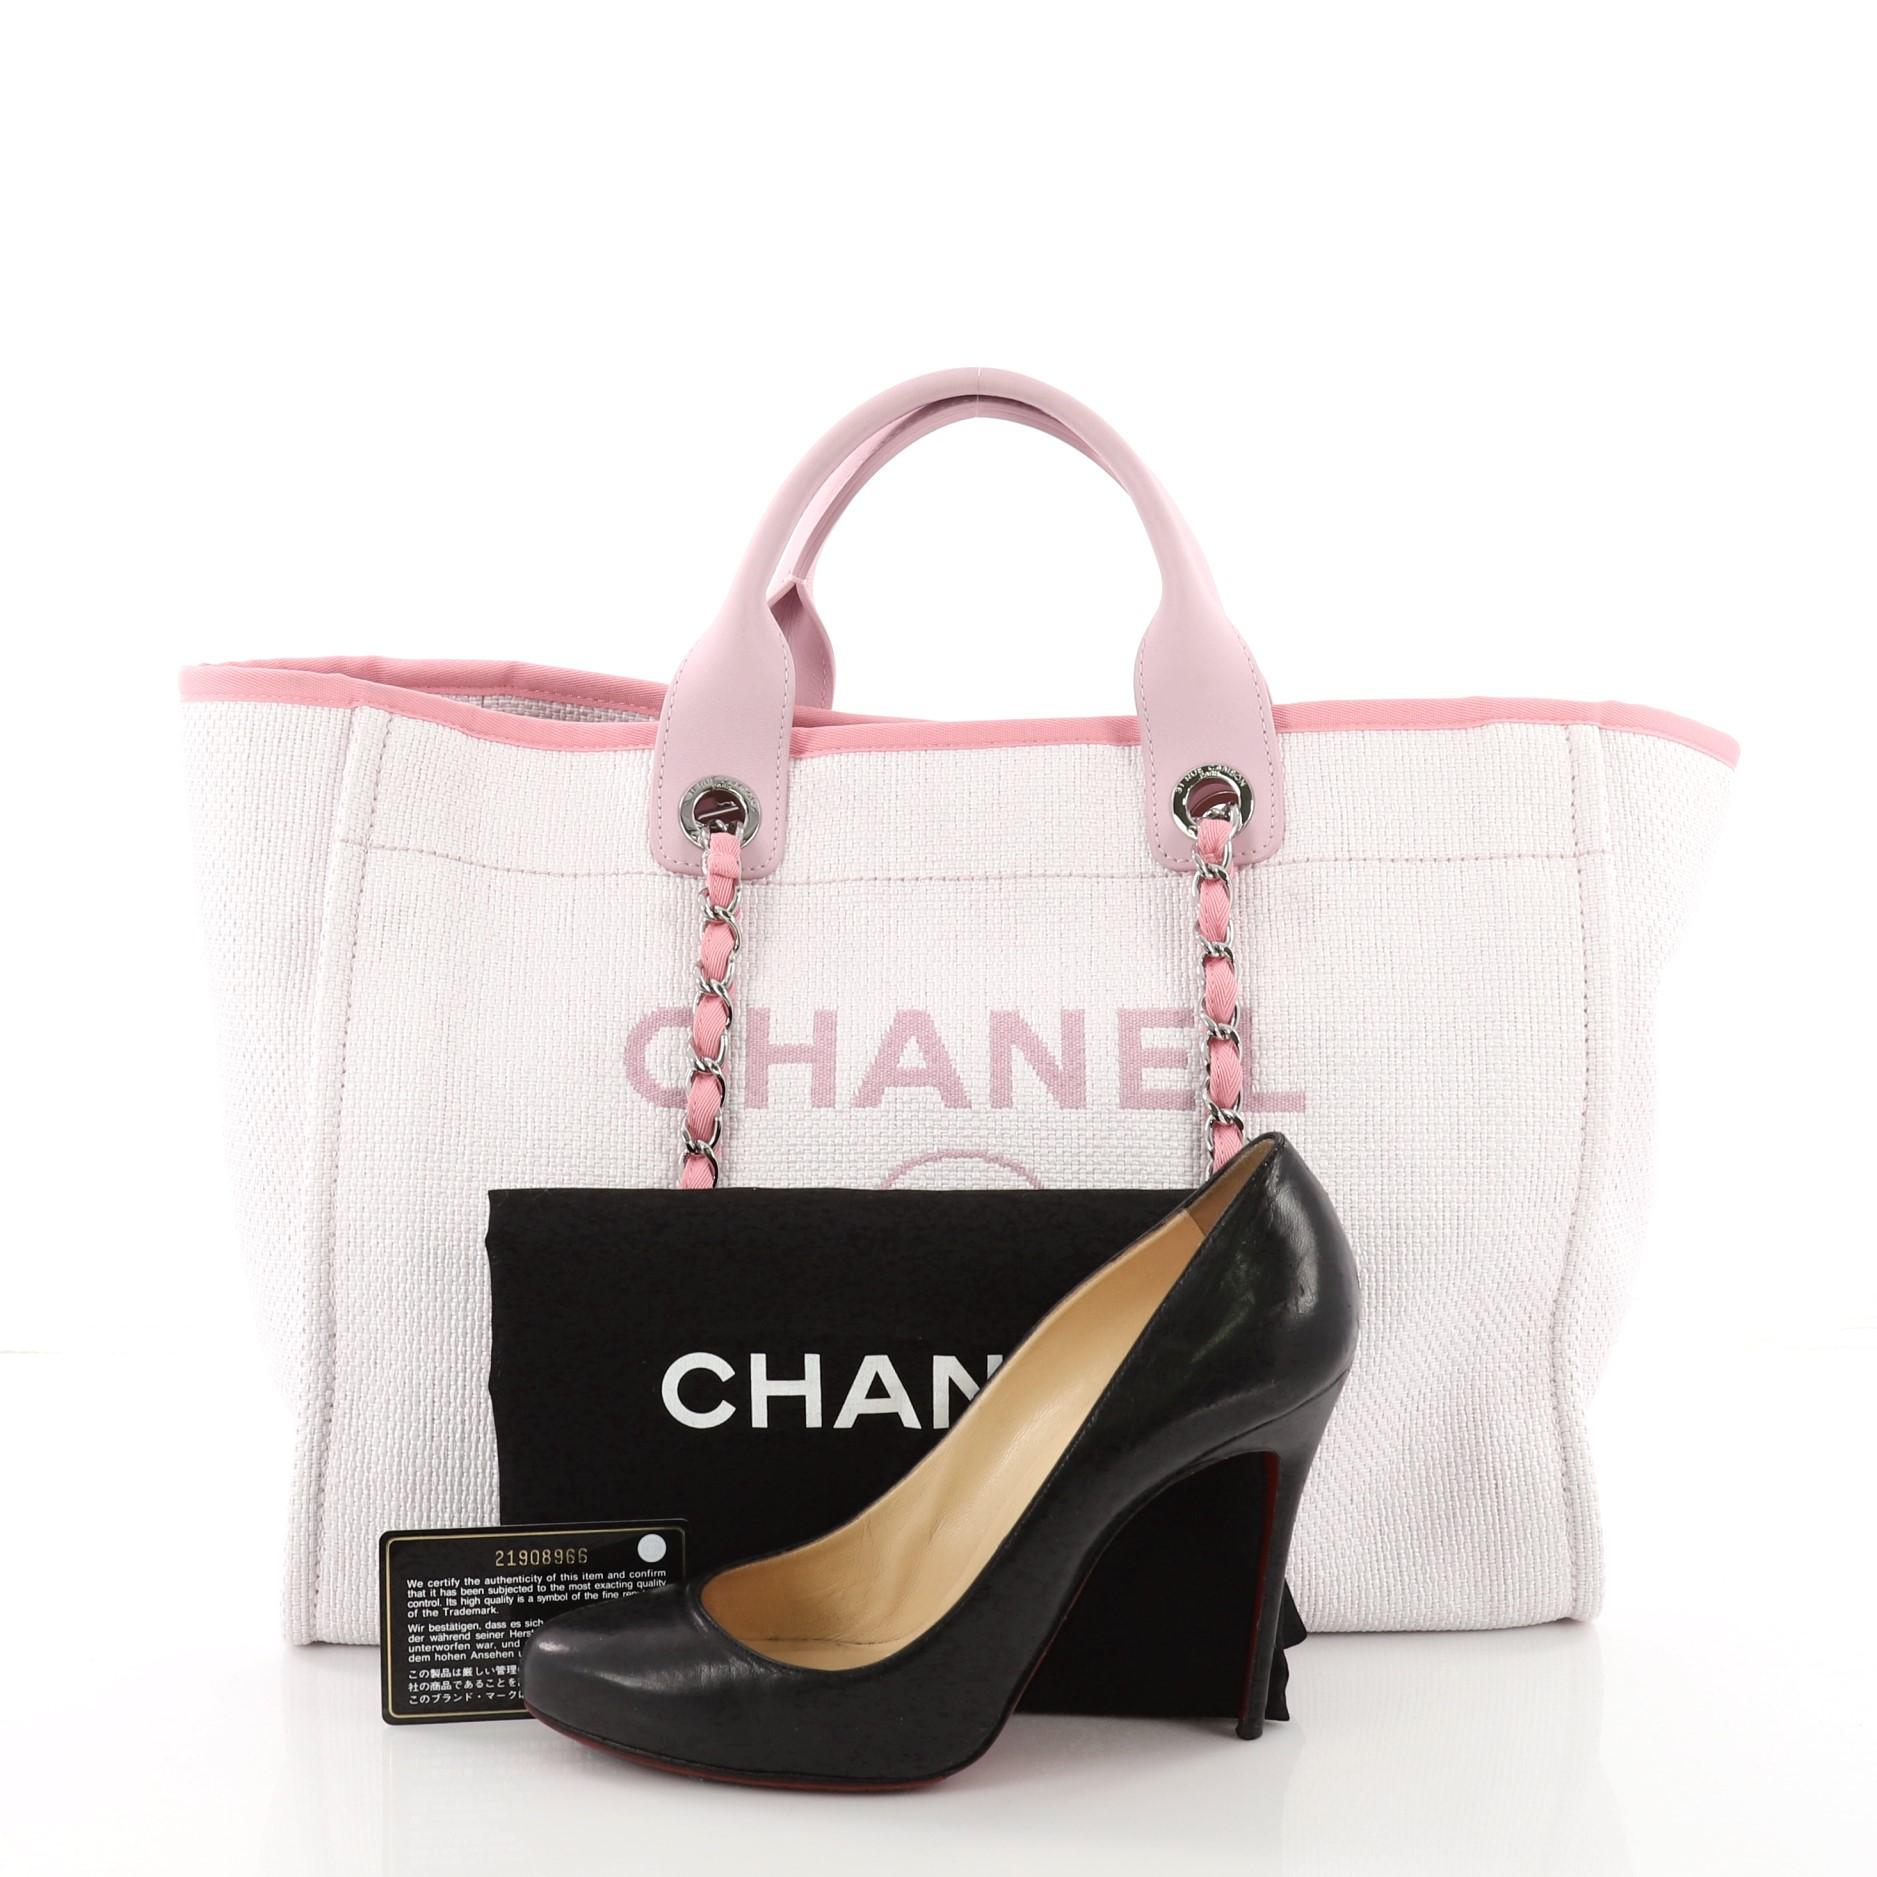 This Chanel Deauville Chain Tote Raffia Large, crafted from white and pink raffia, features dual leather handles, woven-in canvas chain straps, and silver-tone hardware. Its magnetic snap closure opens to a pink fabric interior with slip and zip